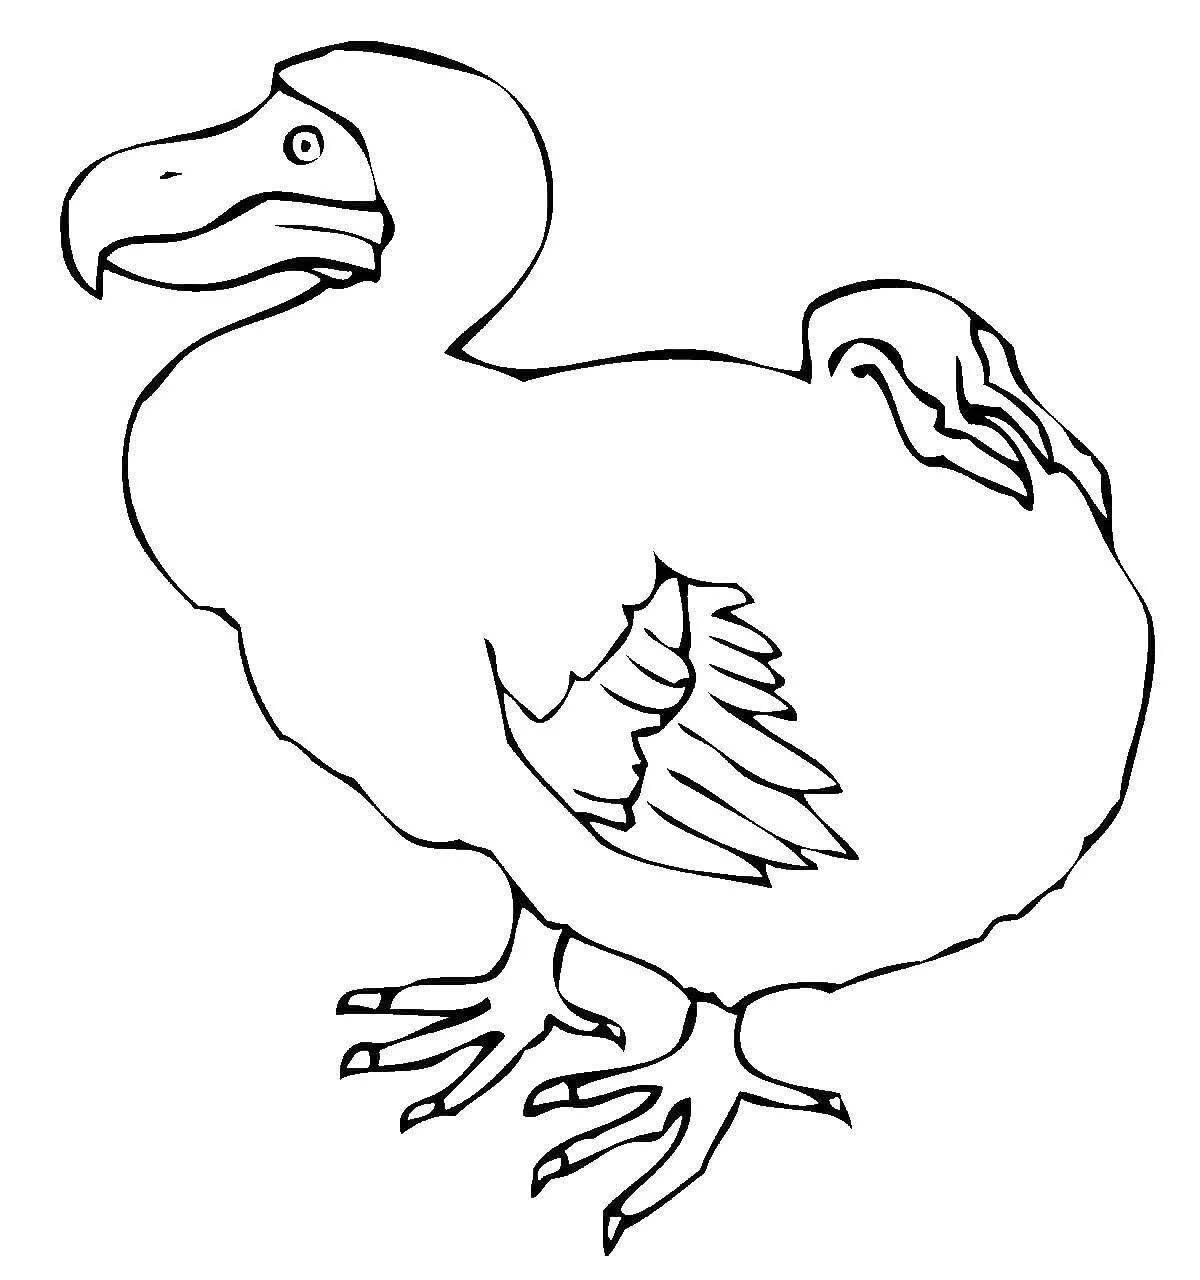 Amazing bustard coloring page